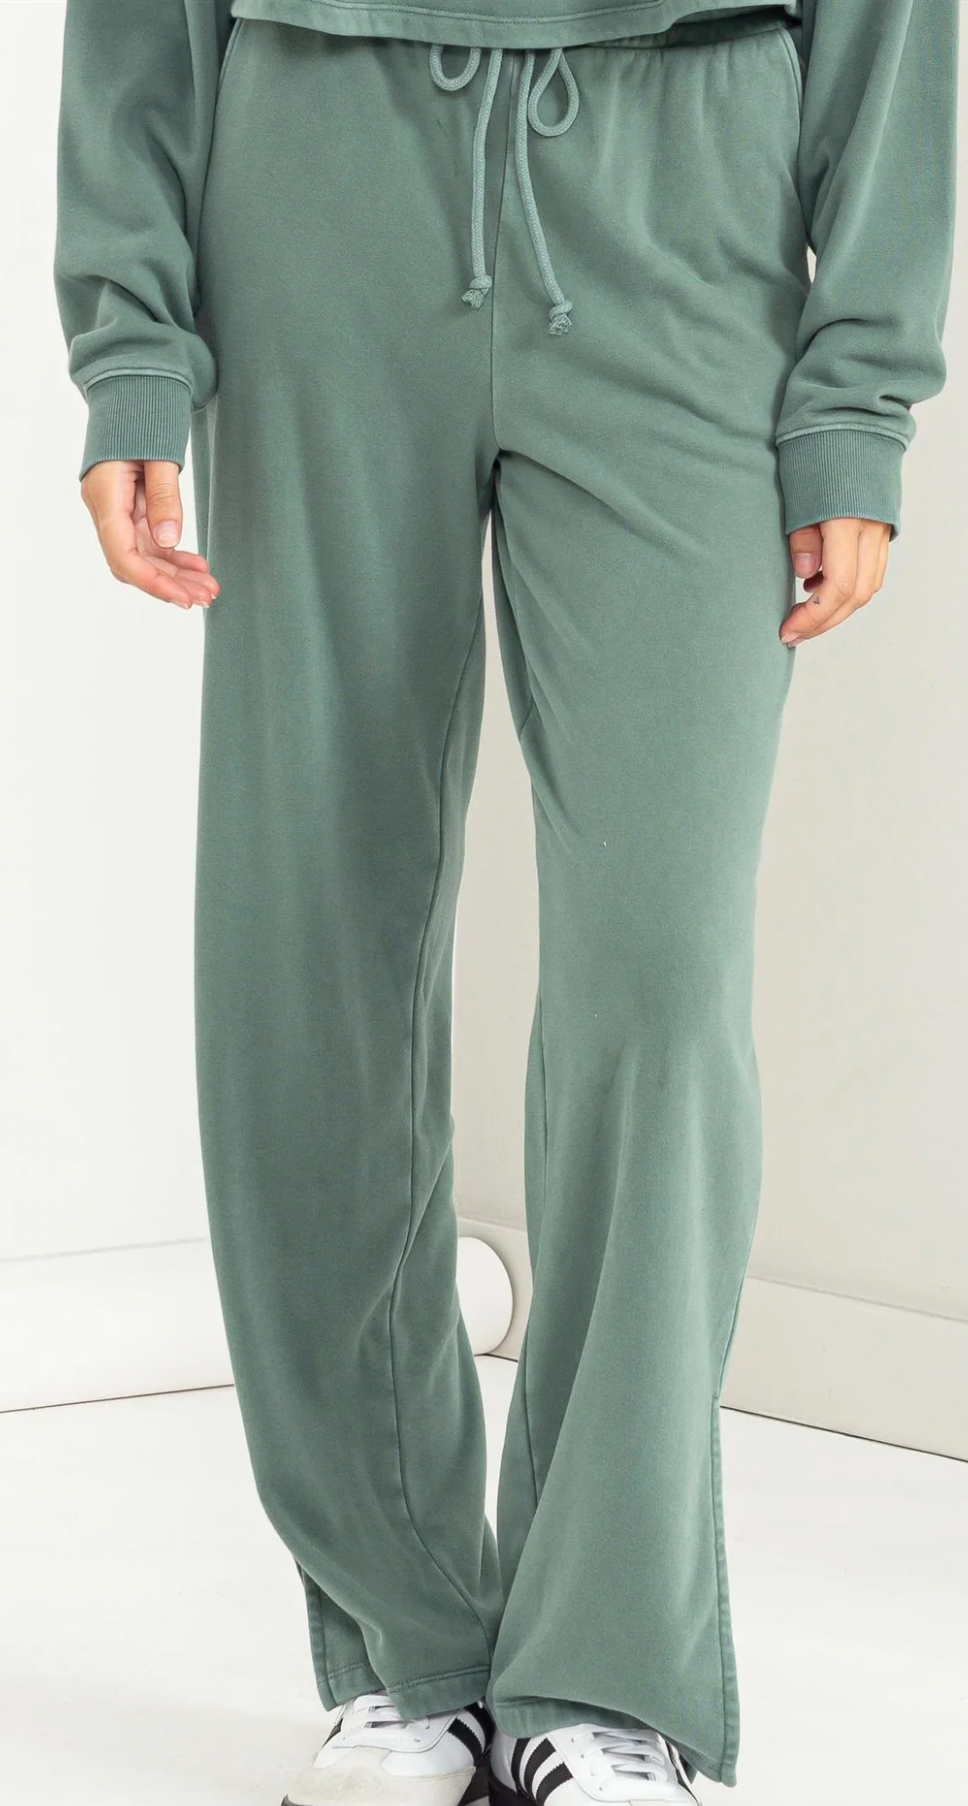 Washed Comfy Lounge Pant